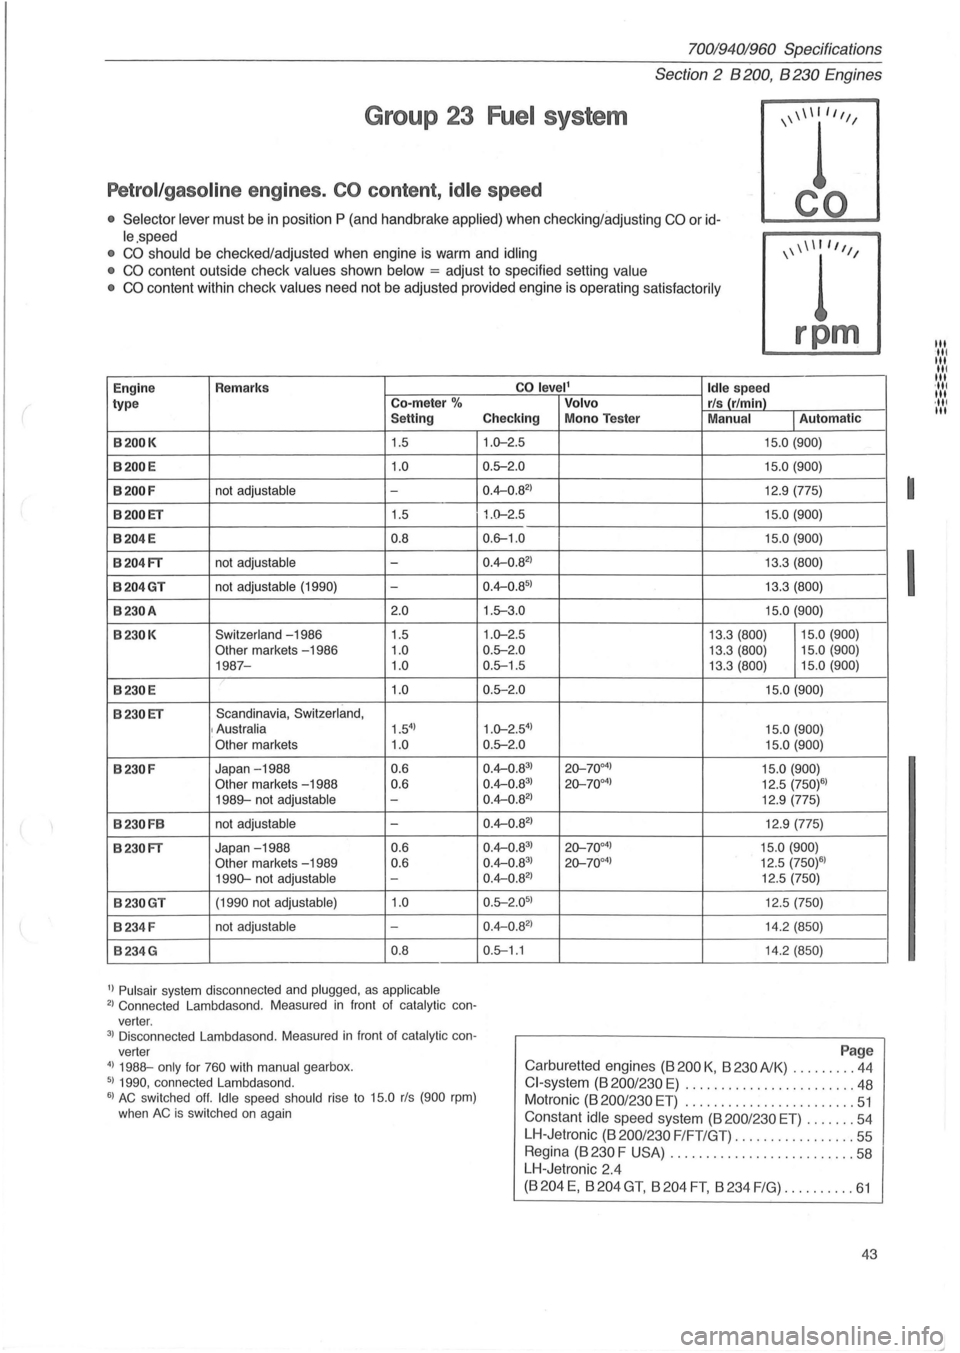 VOLVO 940 1982  Service Service Manual ( 
70019401960 SpecHications 
Section 
2  B 200, B 230 Engines 
Group  23 Fuel system 
Petrol/gasoline engines . CO content, idle speed 
•  Selector  lever must be in position  P (and  handbrake app